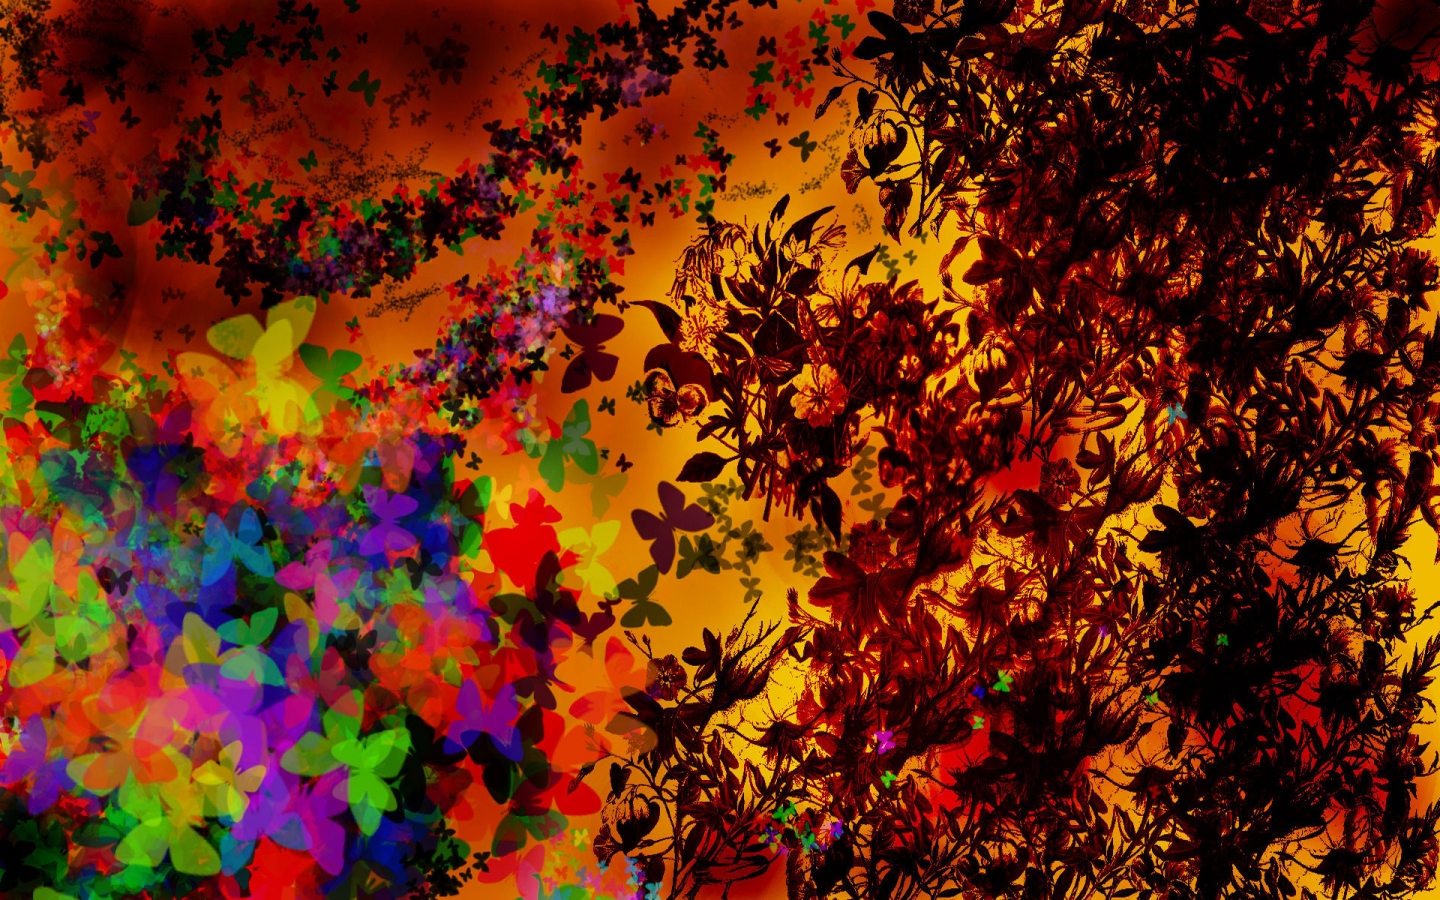 Colourful Fractal for 1440 x 900 widescreen resolution